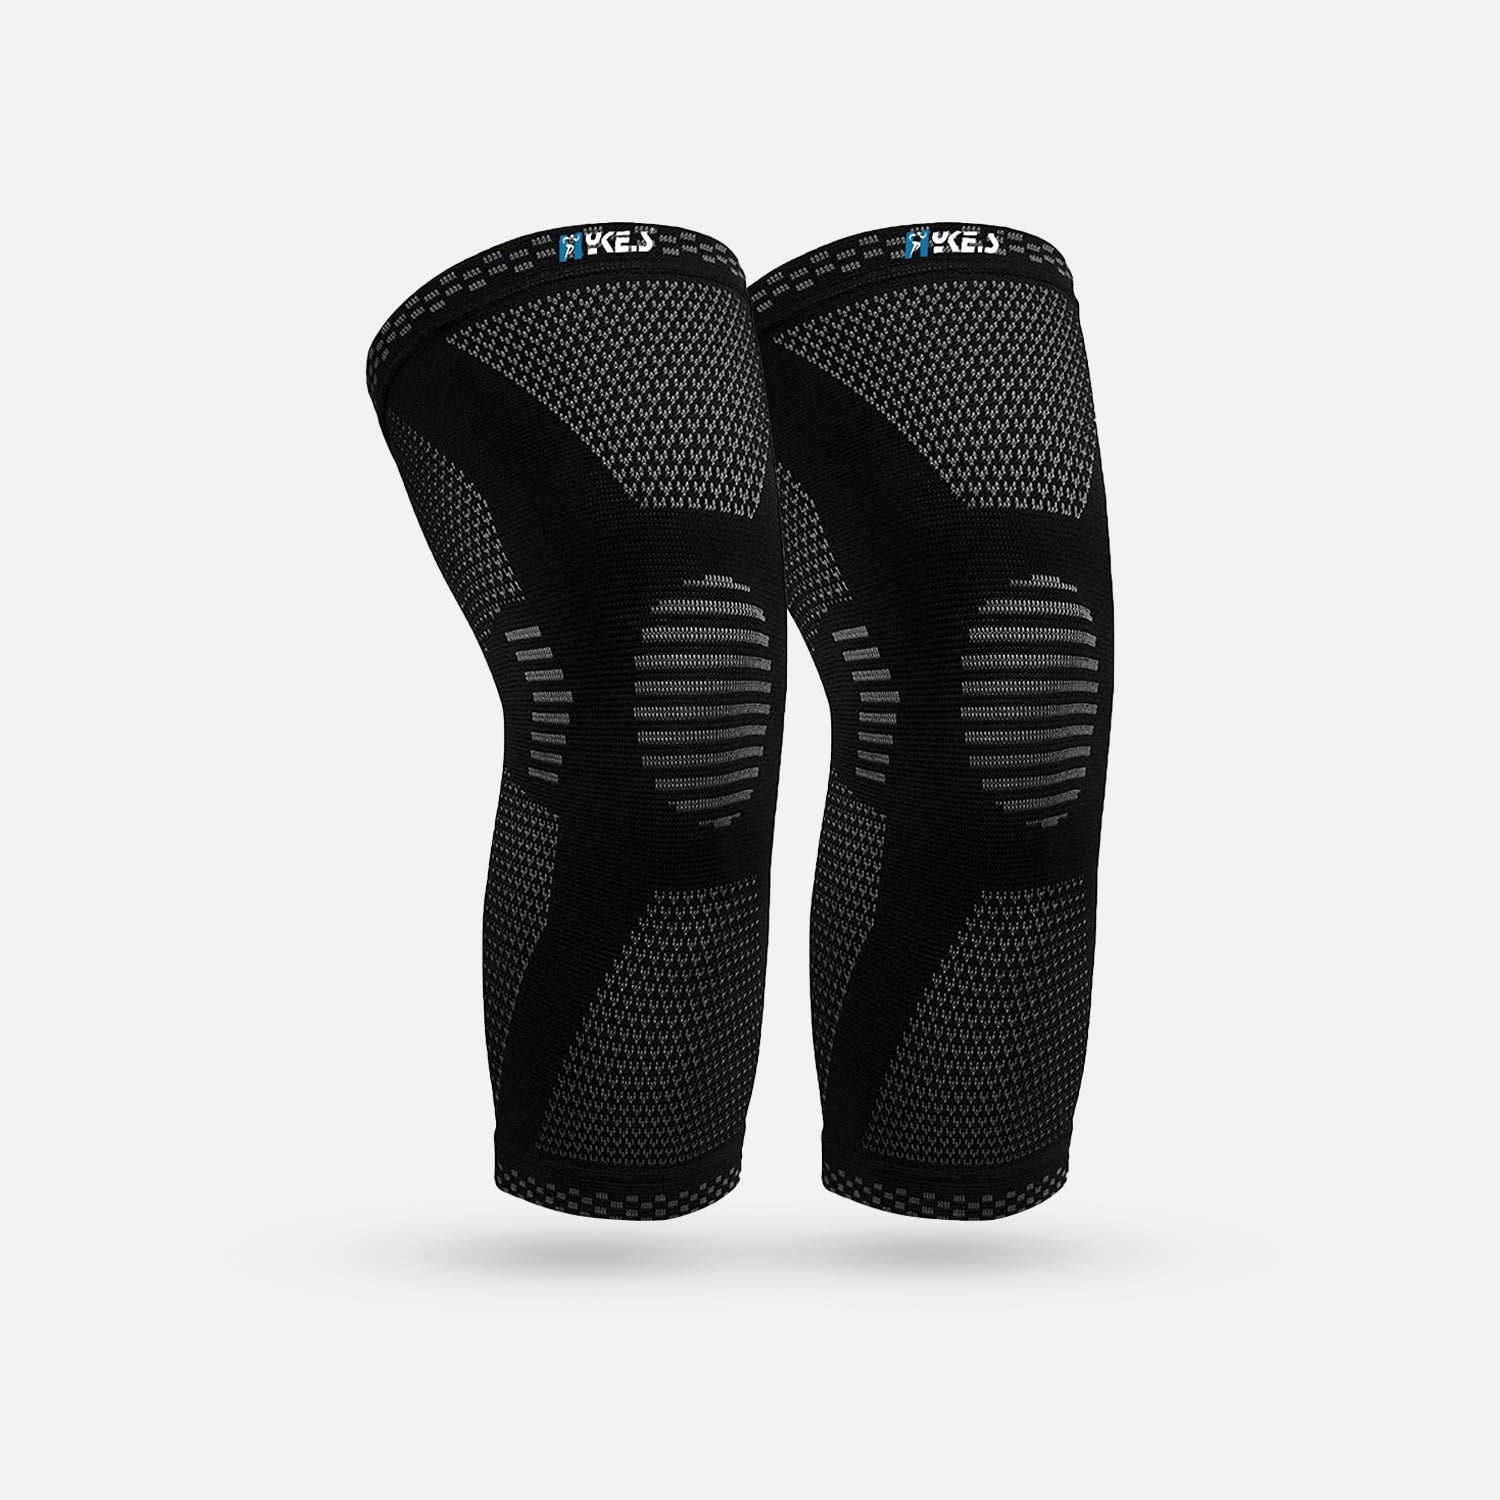 Buy Knee Compression Support Brace for Cycling, Running & Sports – Hykes